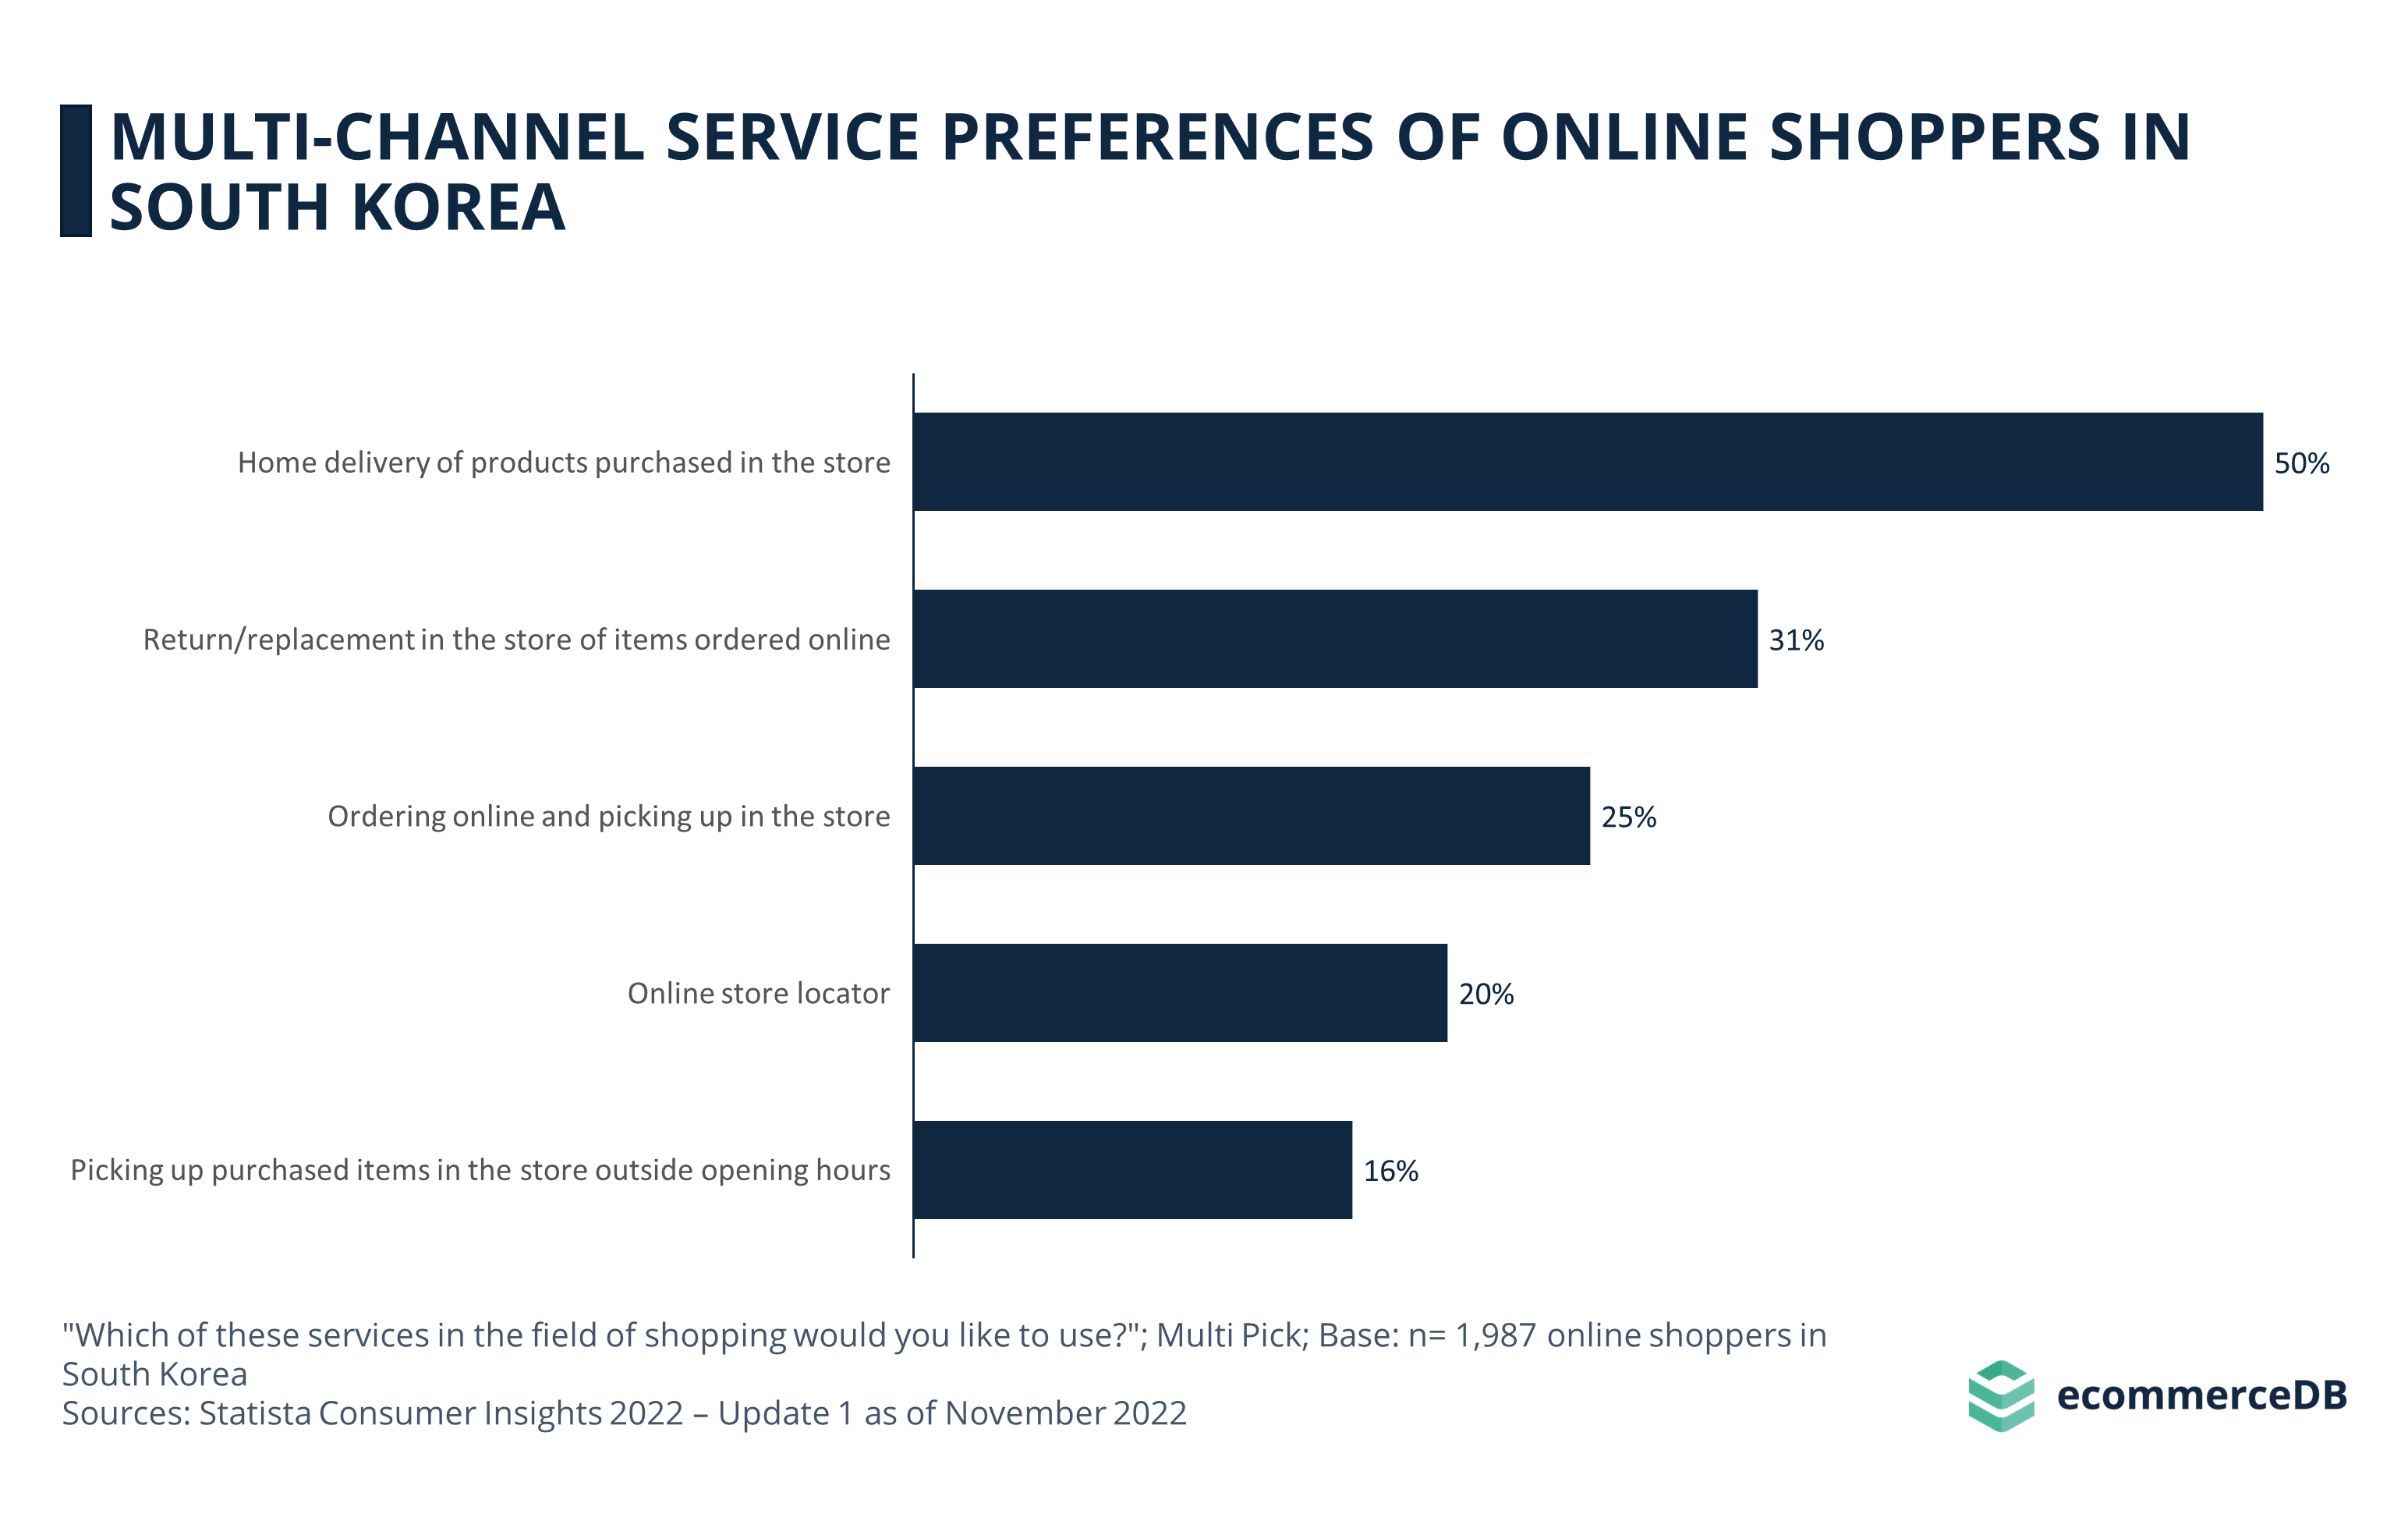 Multi-Channel Service Preferences of Online Shoppers in South Korea